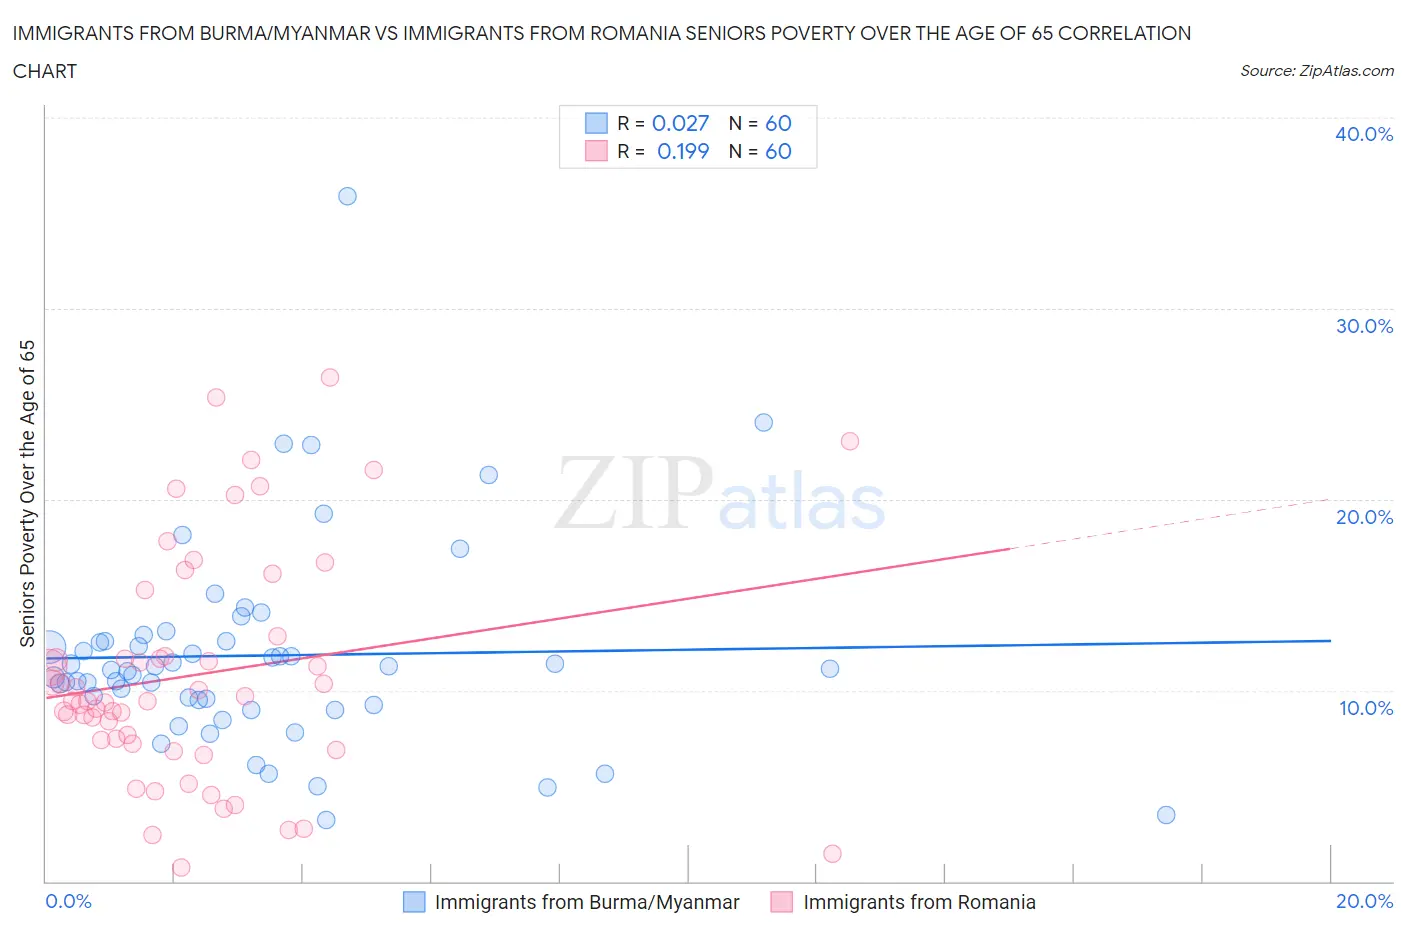 Immigrants from Burma/Myanmar vs Immigrants from Romania Seniors Poverty Over the Age of 65